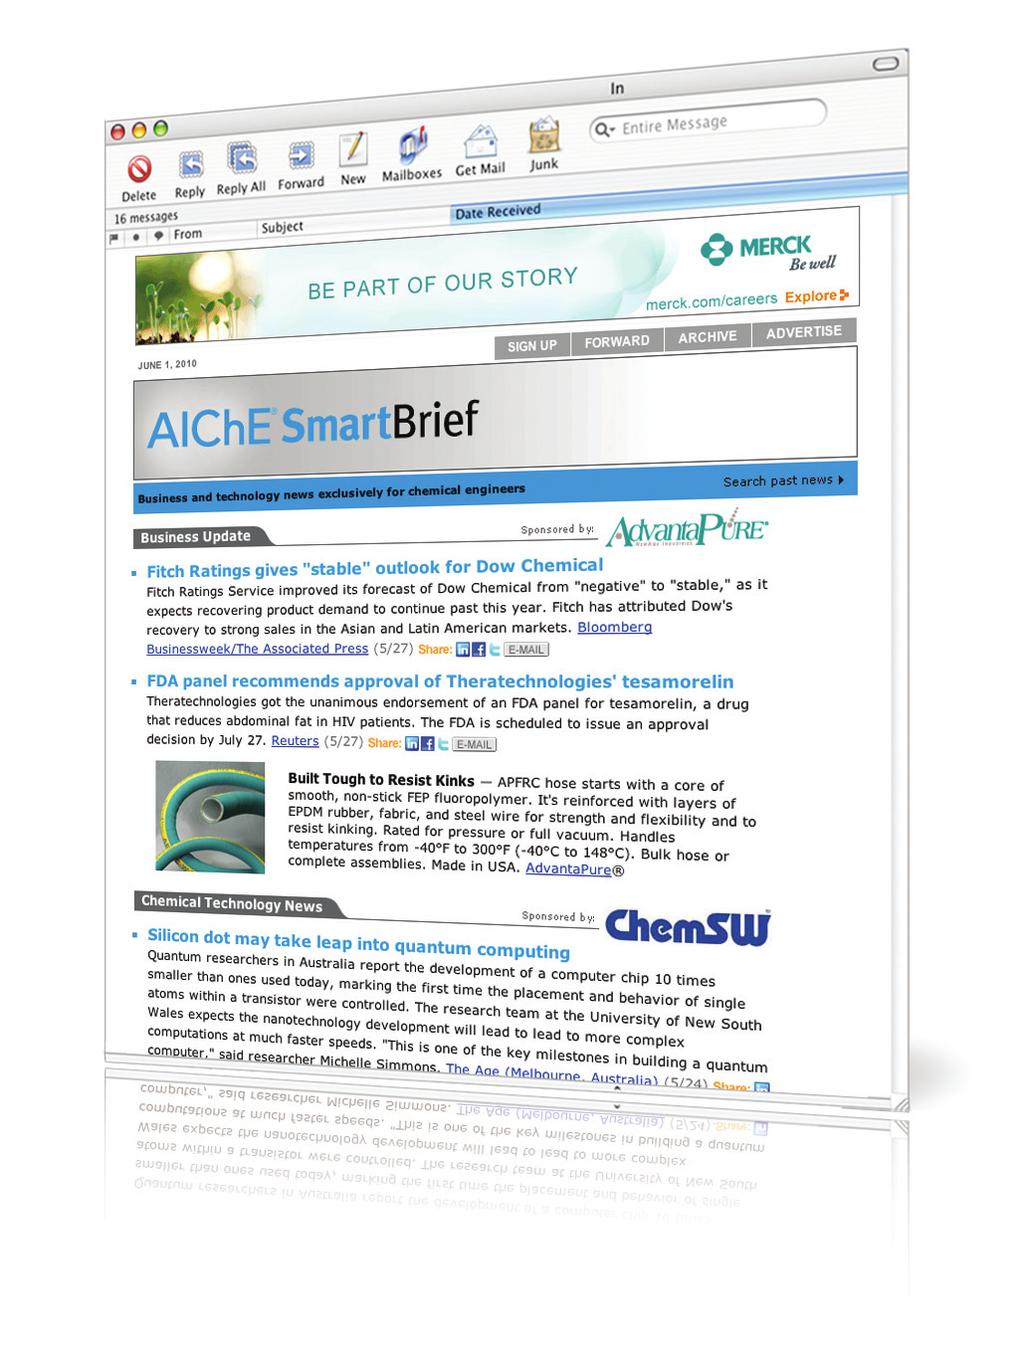 2010 Meda Kt 2010 Meda Kt Launched n the sprng of 2009, AIChE has quckly grown to become one of the most trusted news resources for chemcal engneerng professonals.